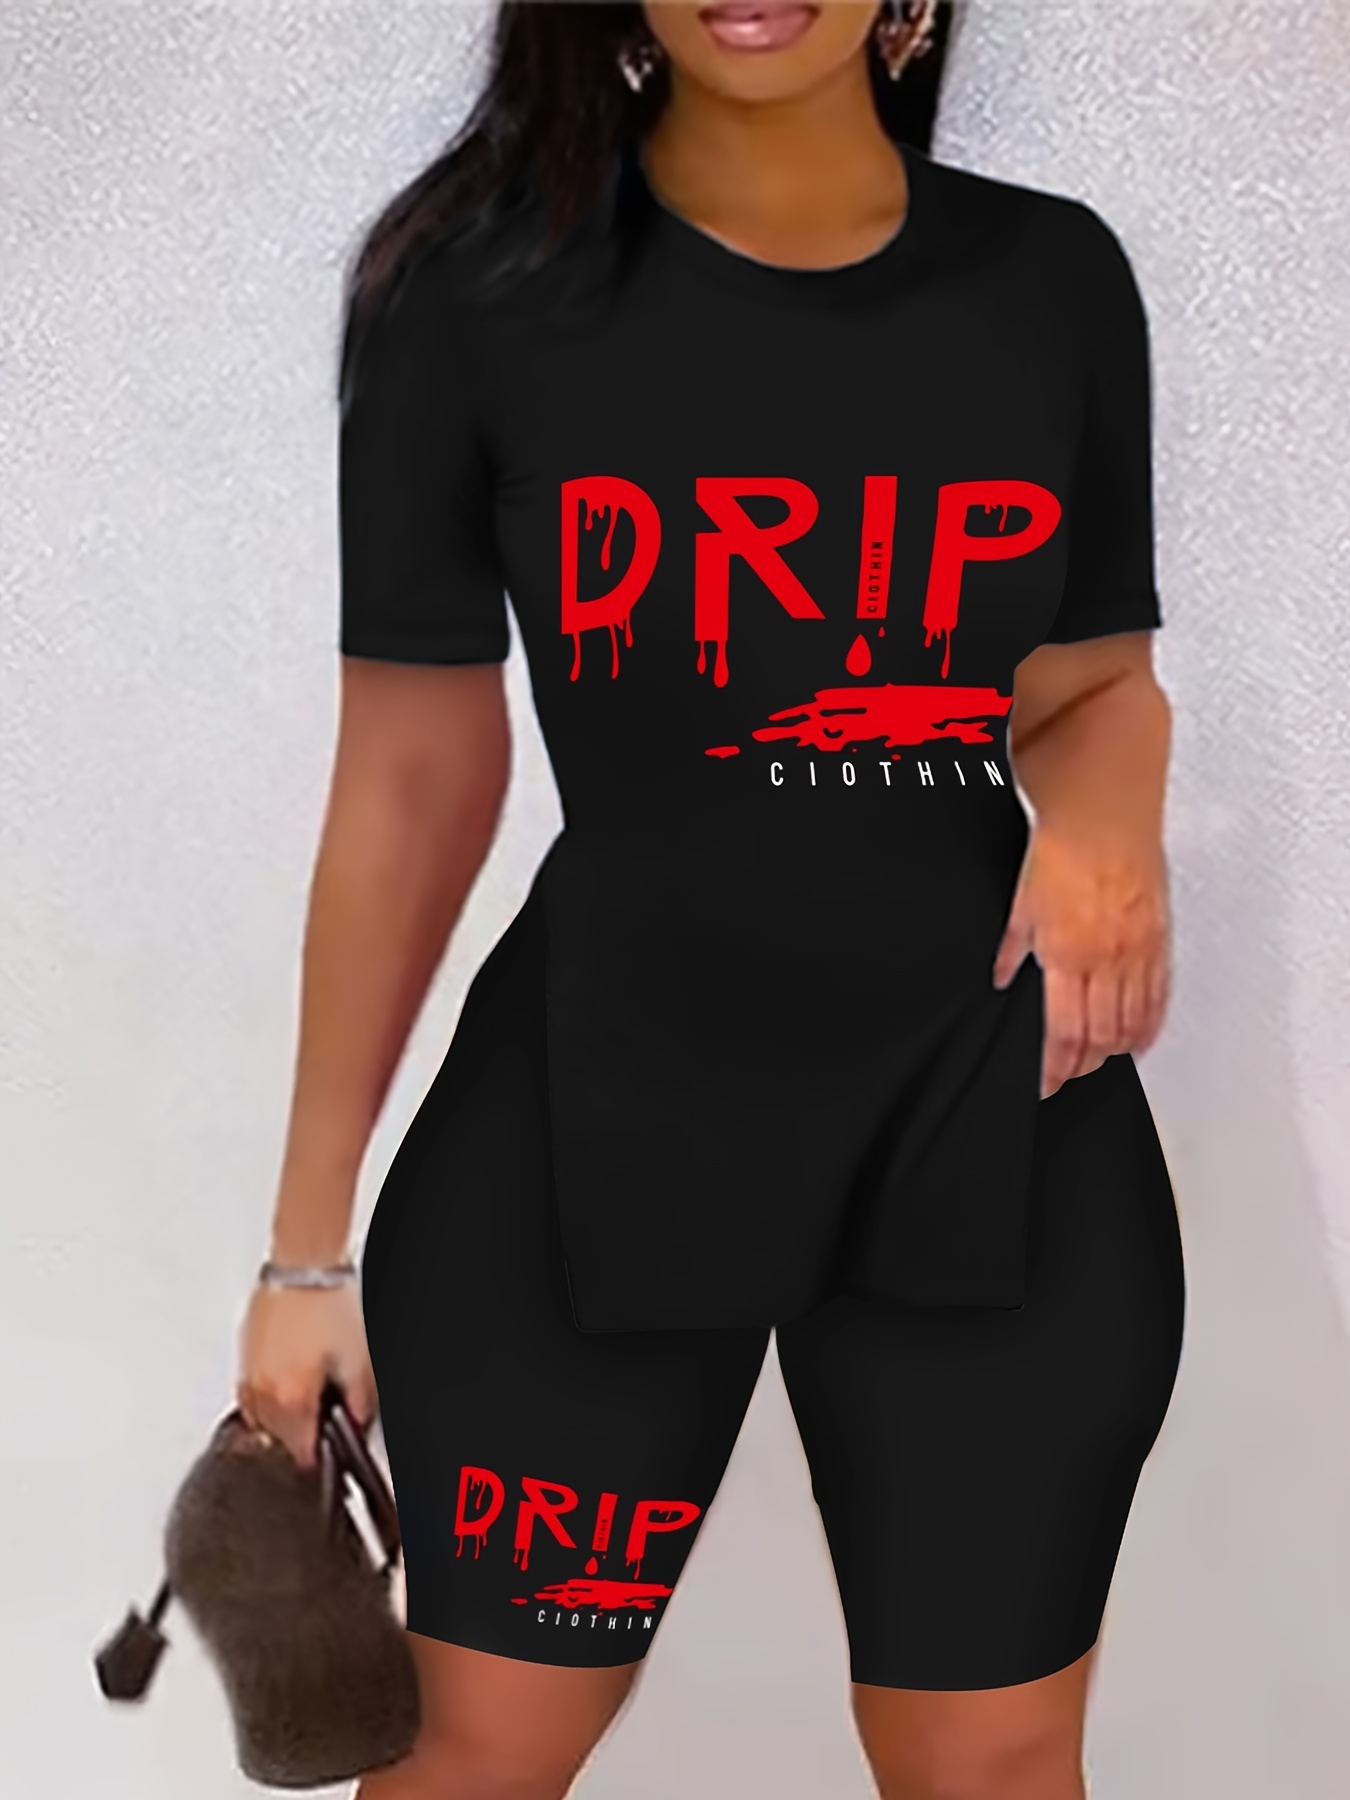 Some drip clothings